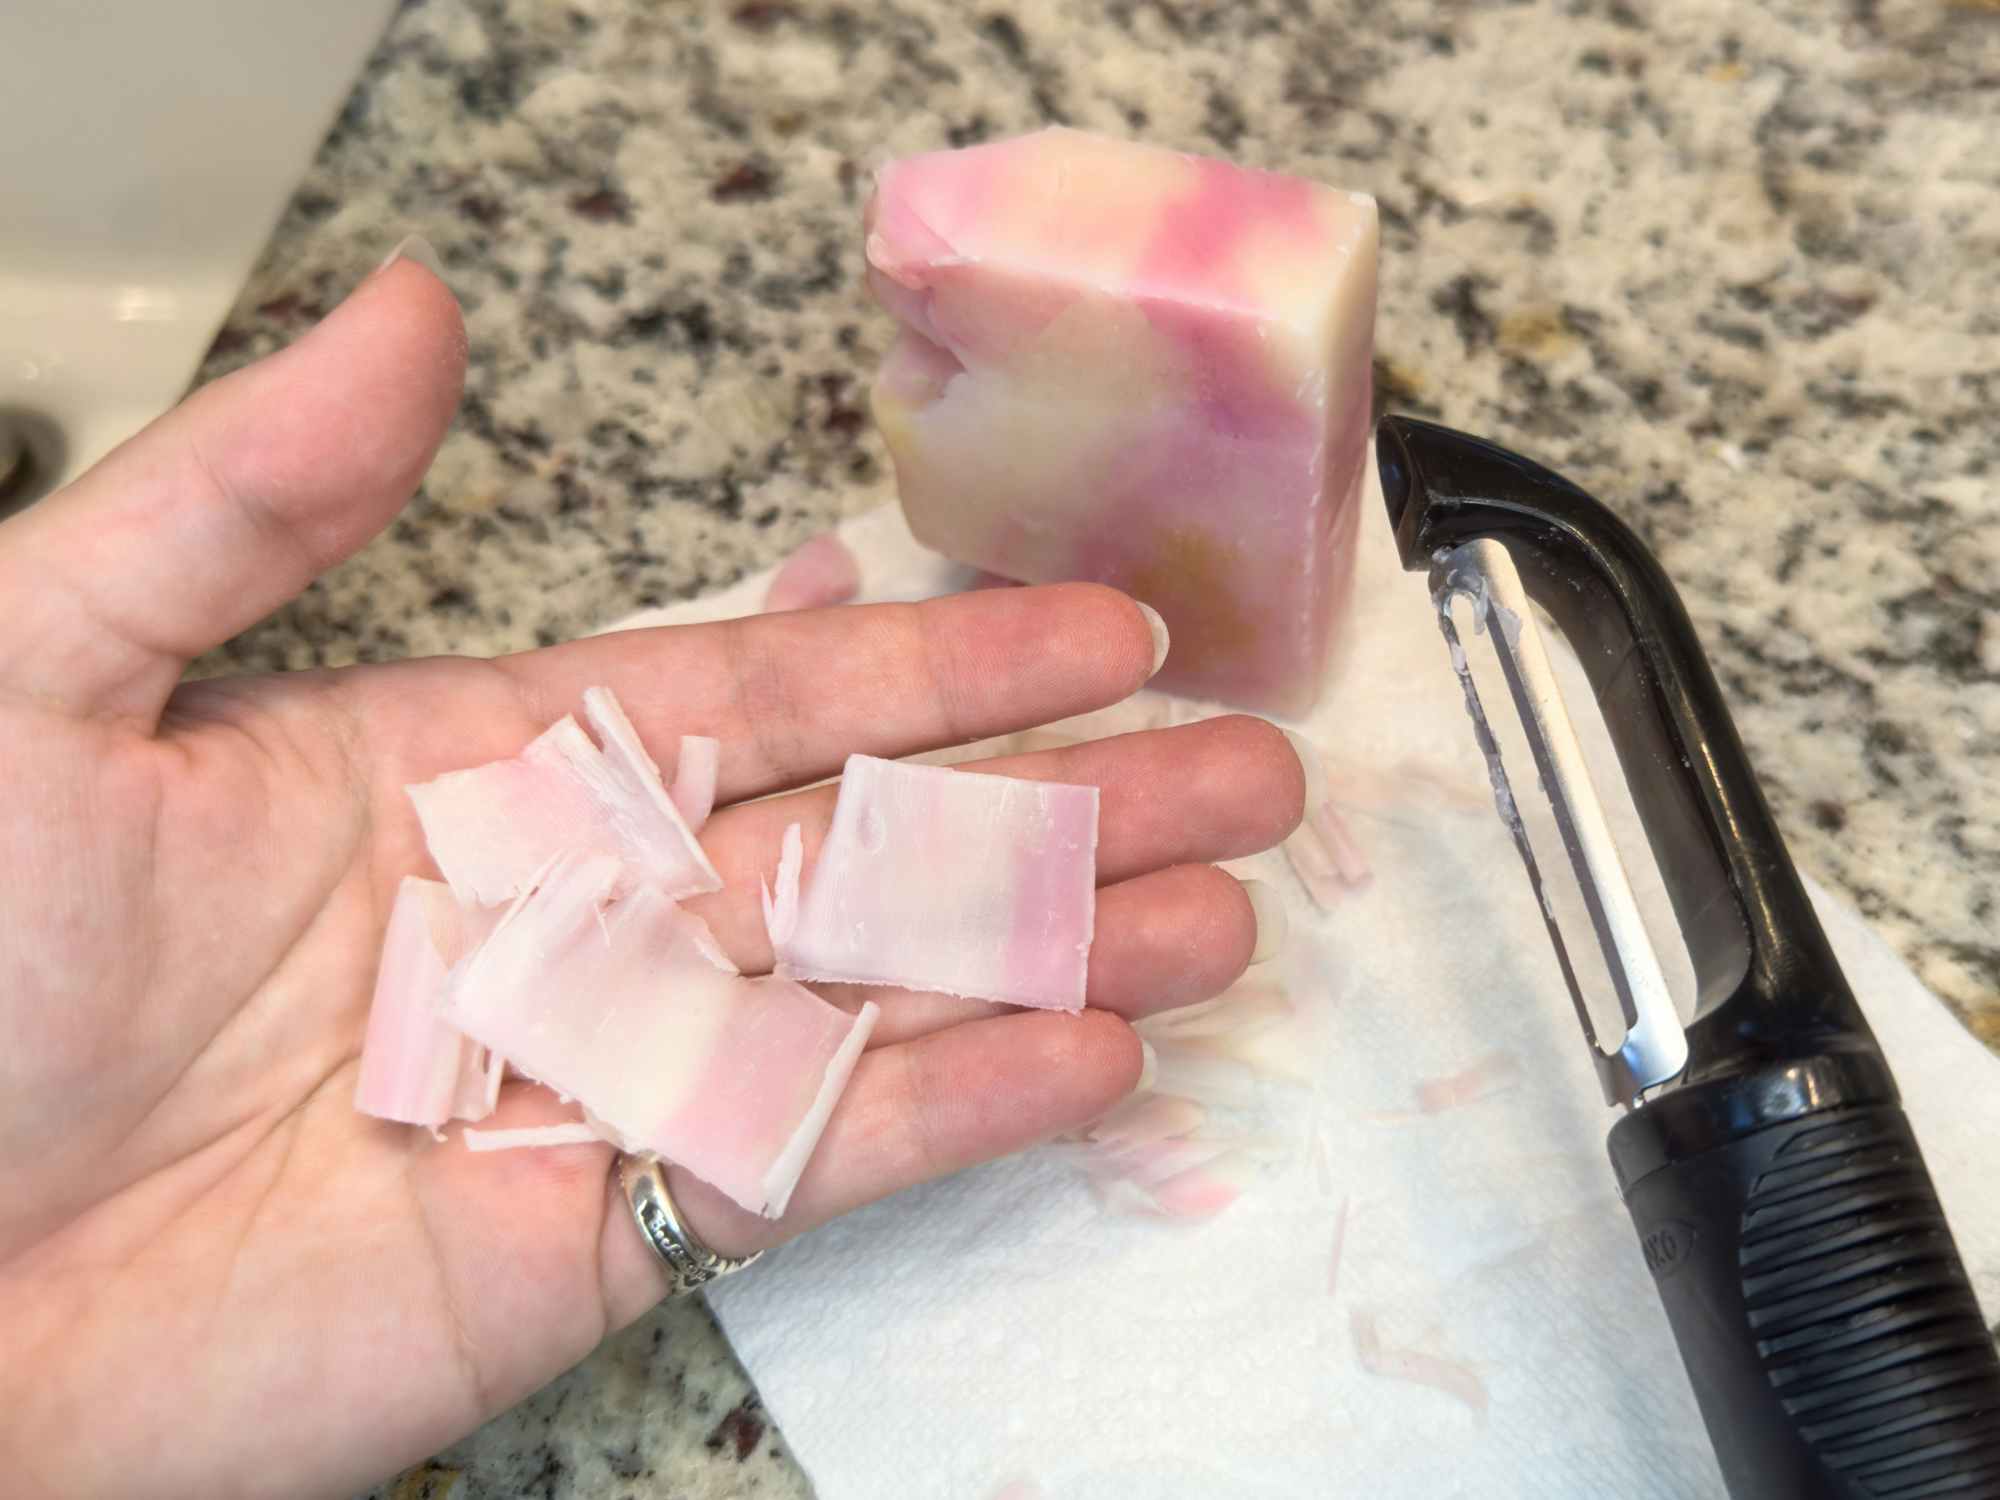 Someone using a vegetable peeler to make single use soap squares